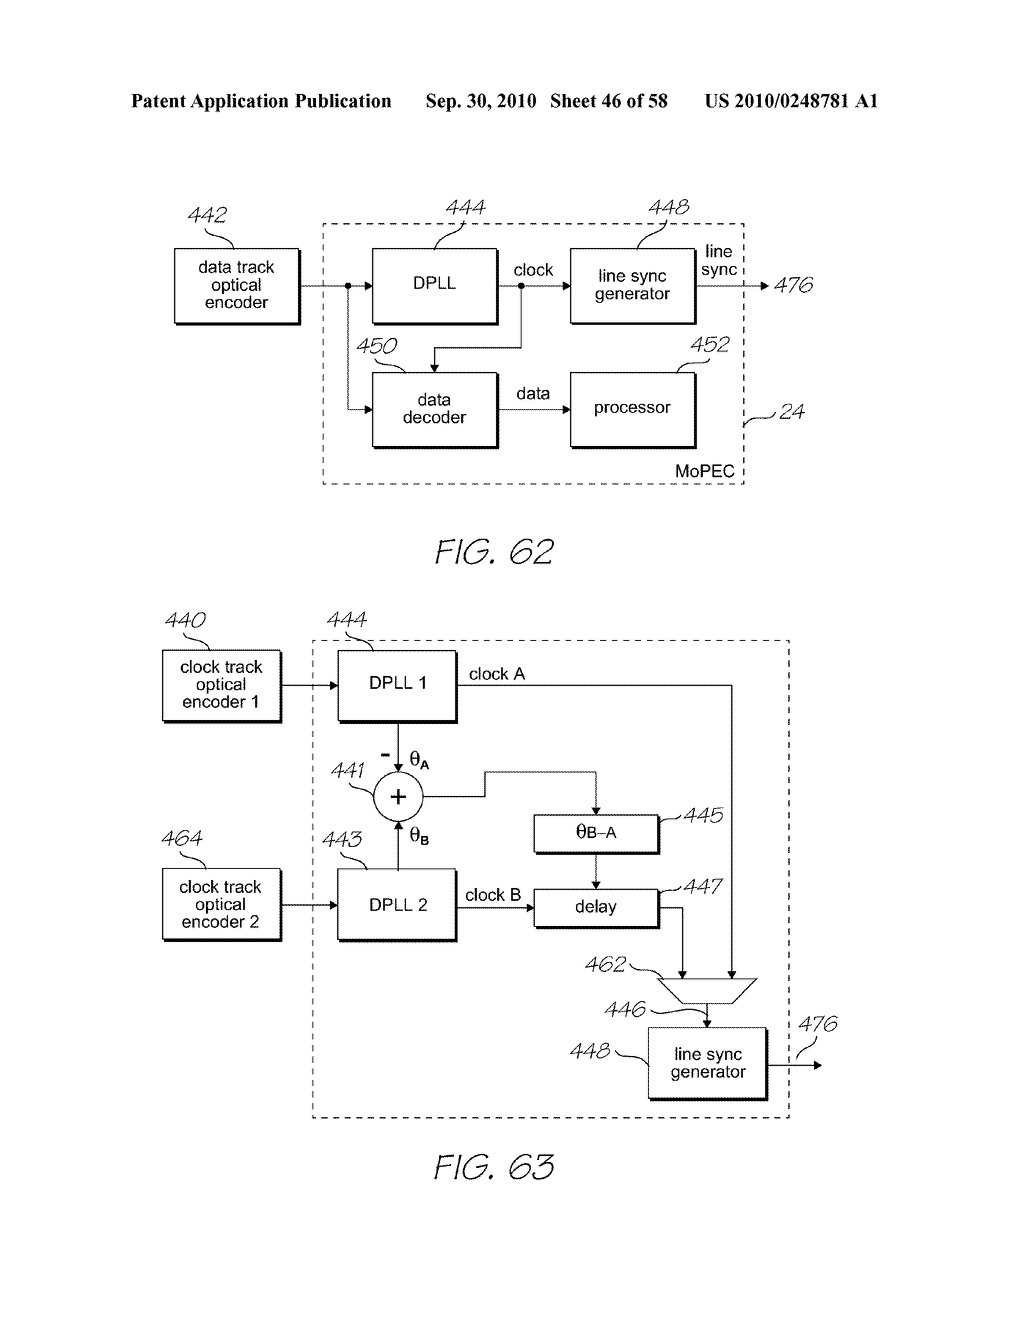 MOBILE TELECOMMUNICATIONS DEVICE WITH IMAGE SENSOR DIRECTED INTERNALLY AND EXTERNALLY - diagram, schematic, and image 47